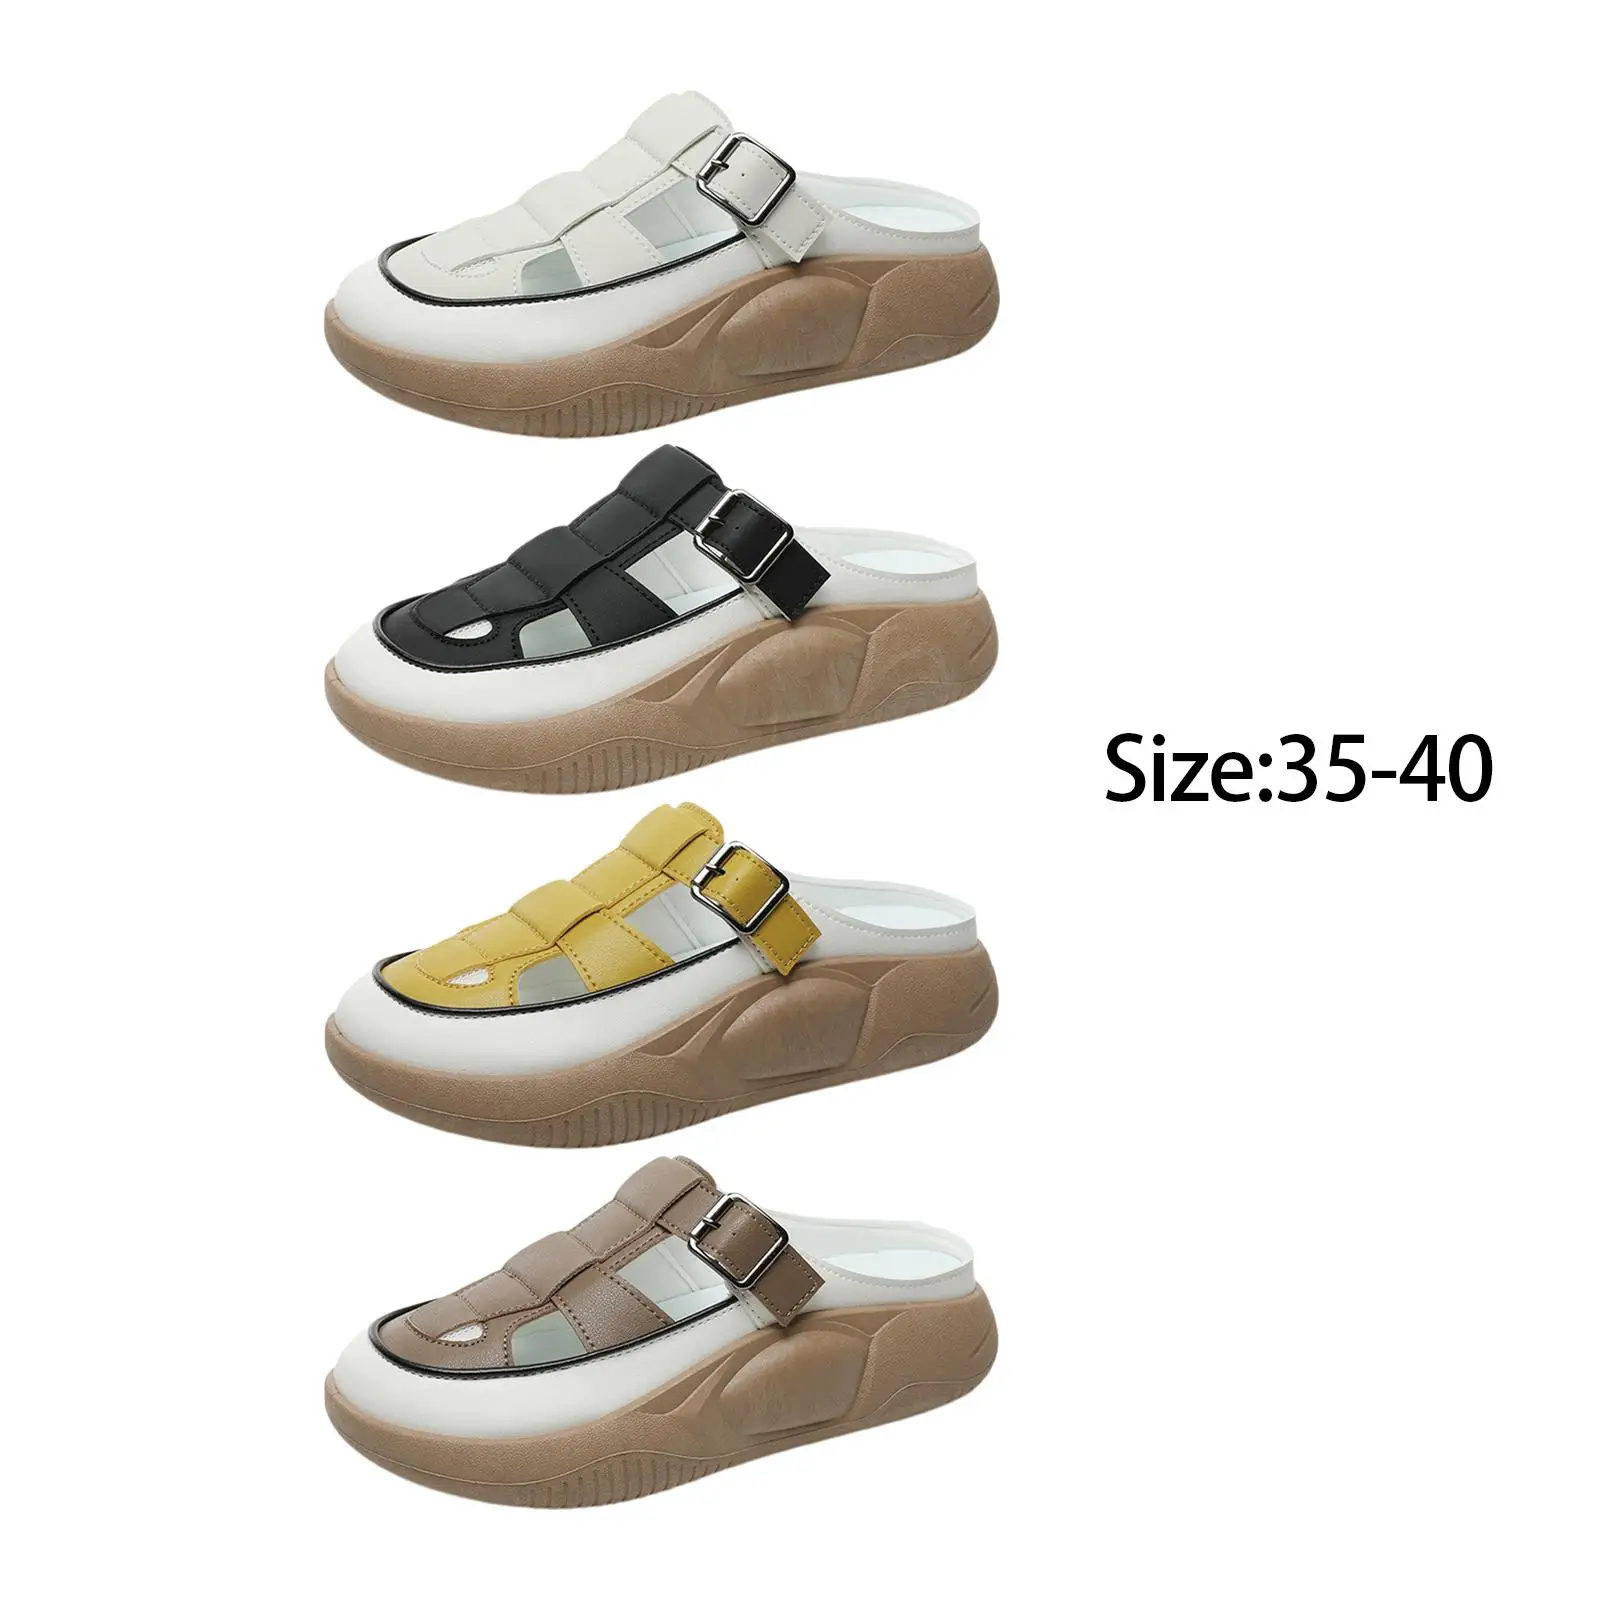 Slippers Platform with Buckle Comfortable House Slippers Lightweight andals for Outdoor Casual Shower Ladies Girls Travel